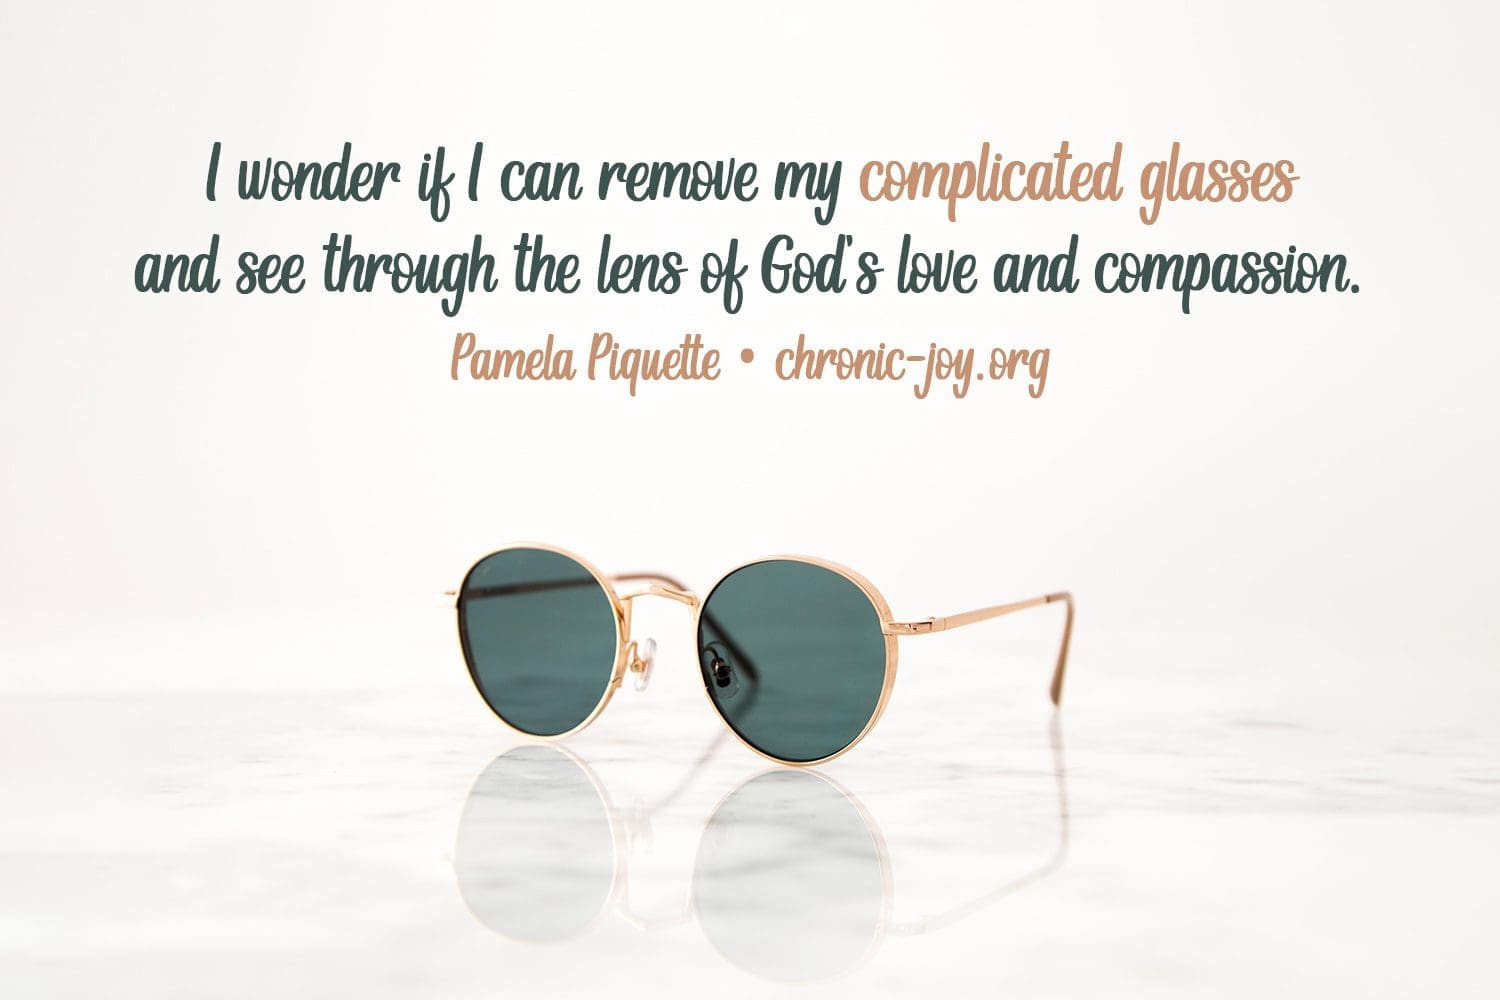 "I wonder if I can remove my complicated glasses and see through the lens of God’s love and compassion." Pamela Piquette